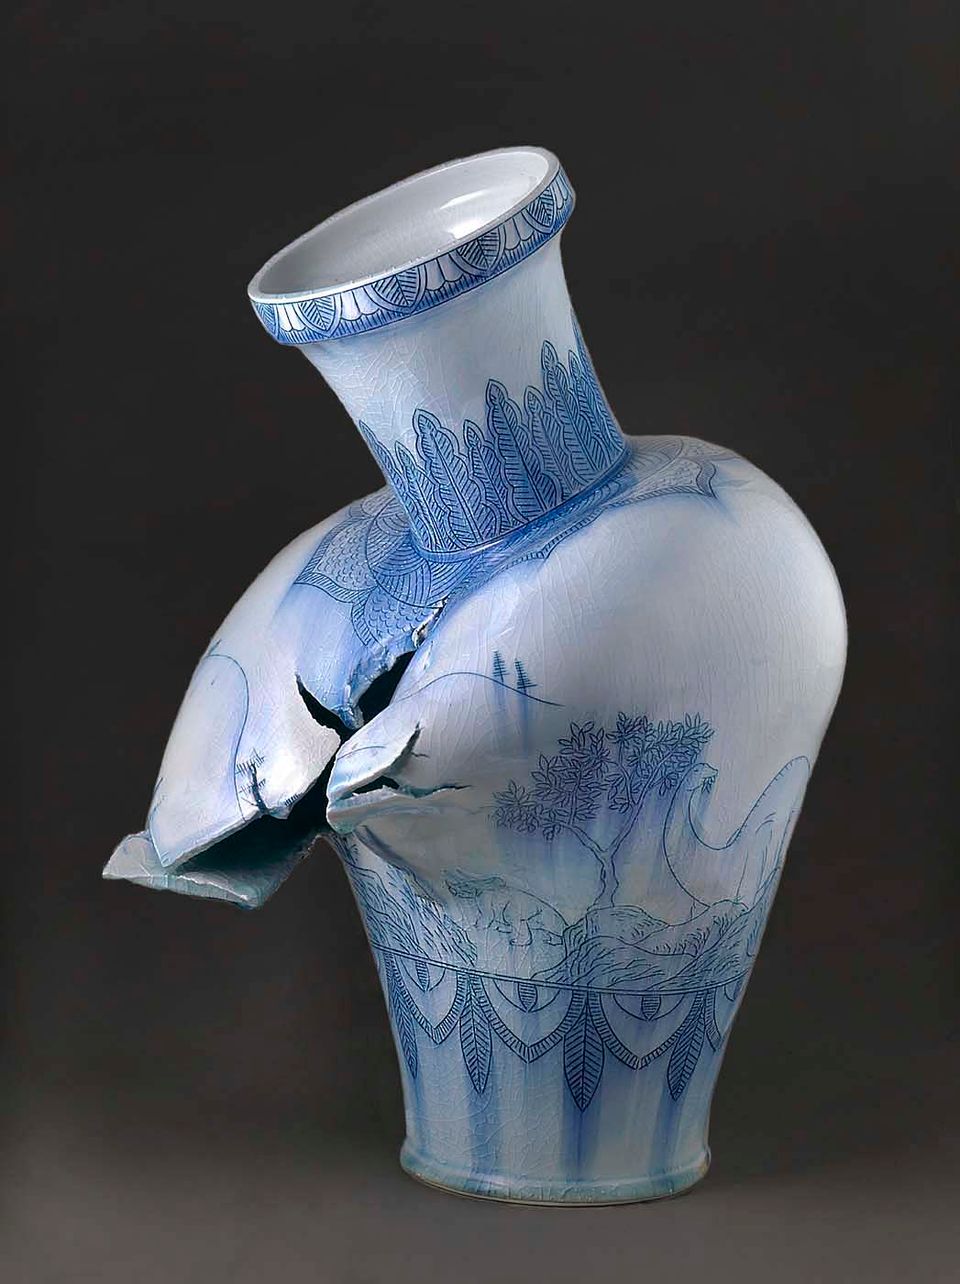 This image shows a vase that appears to have broken from the inside by artist Steven Young Lee